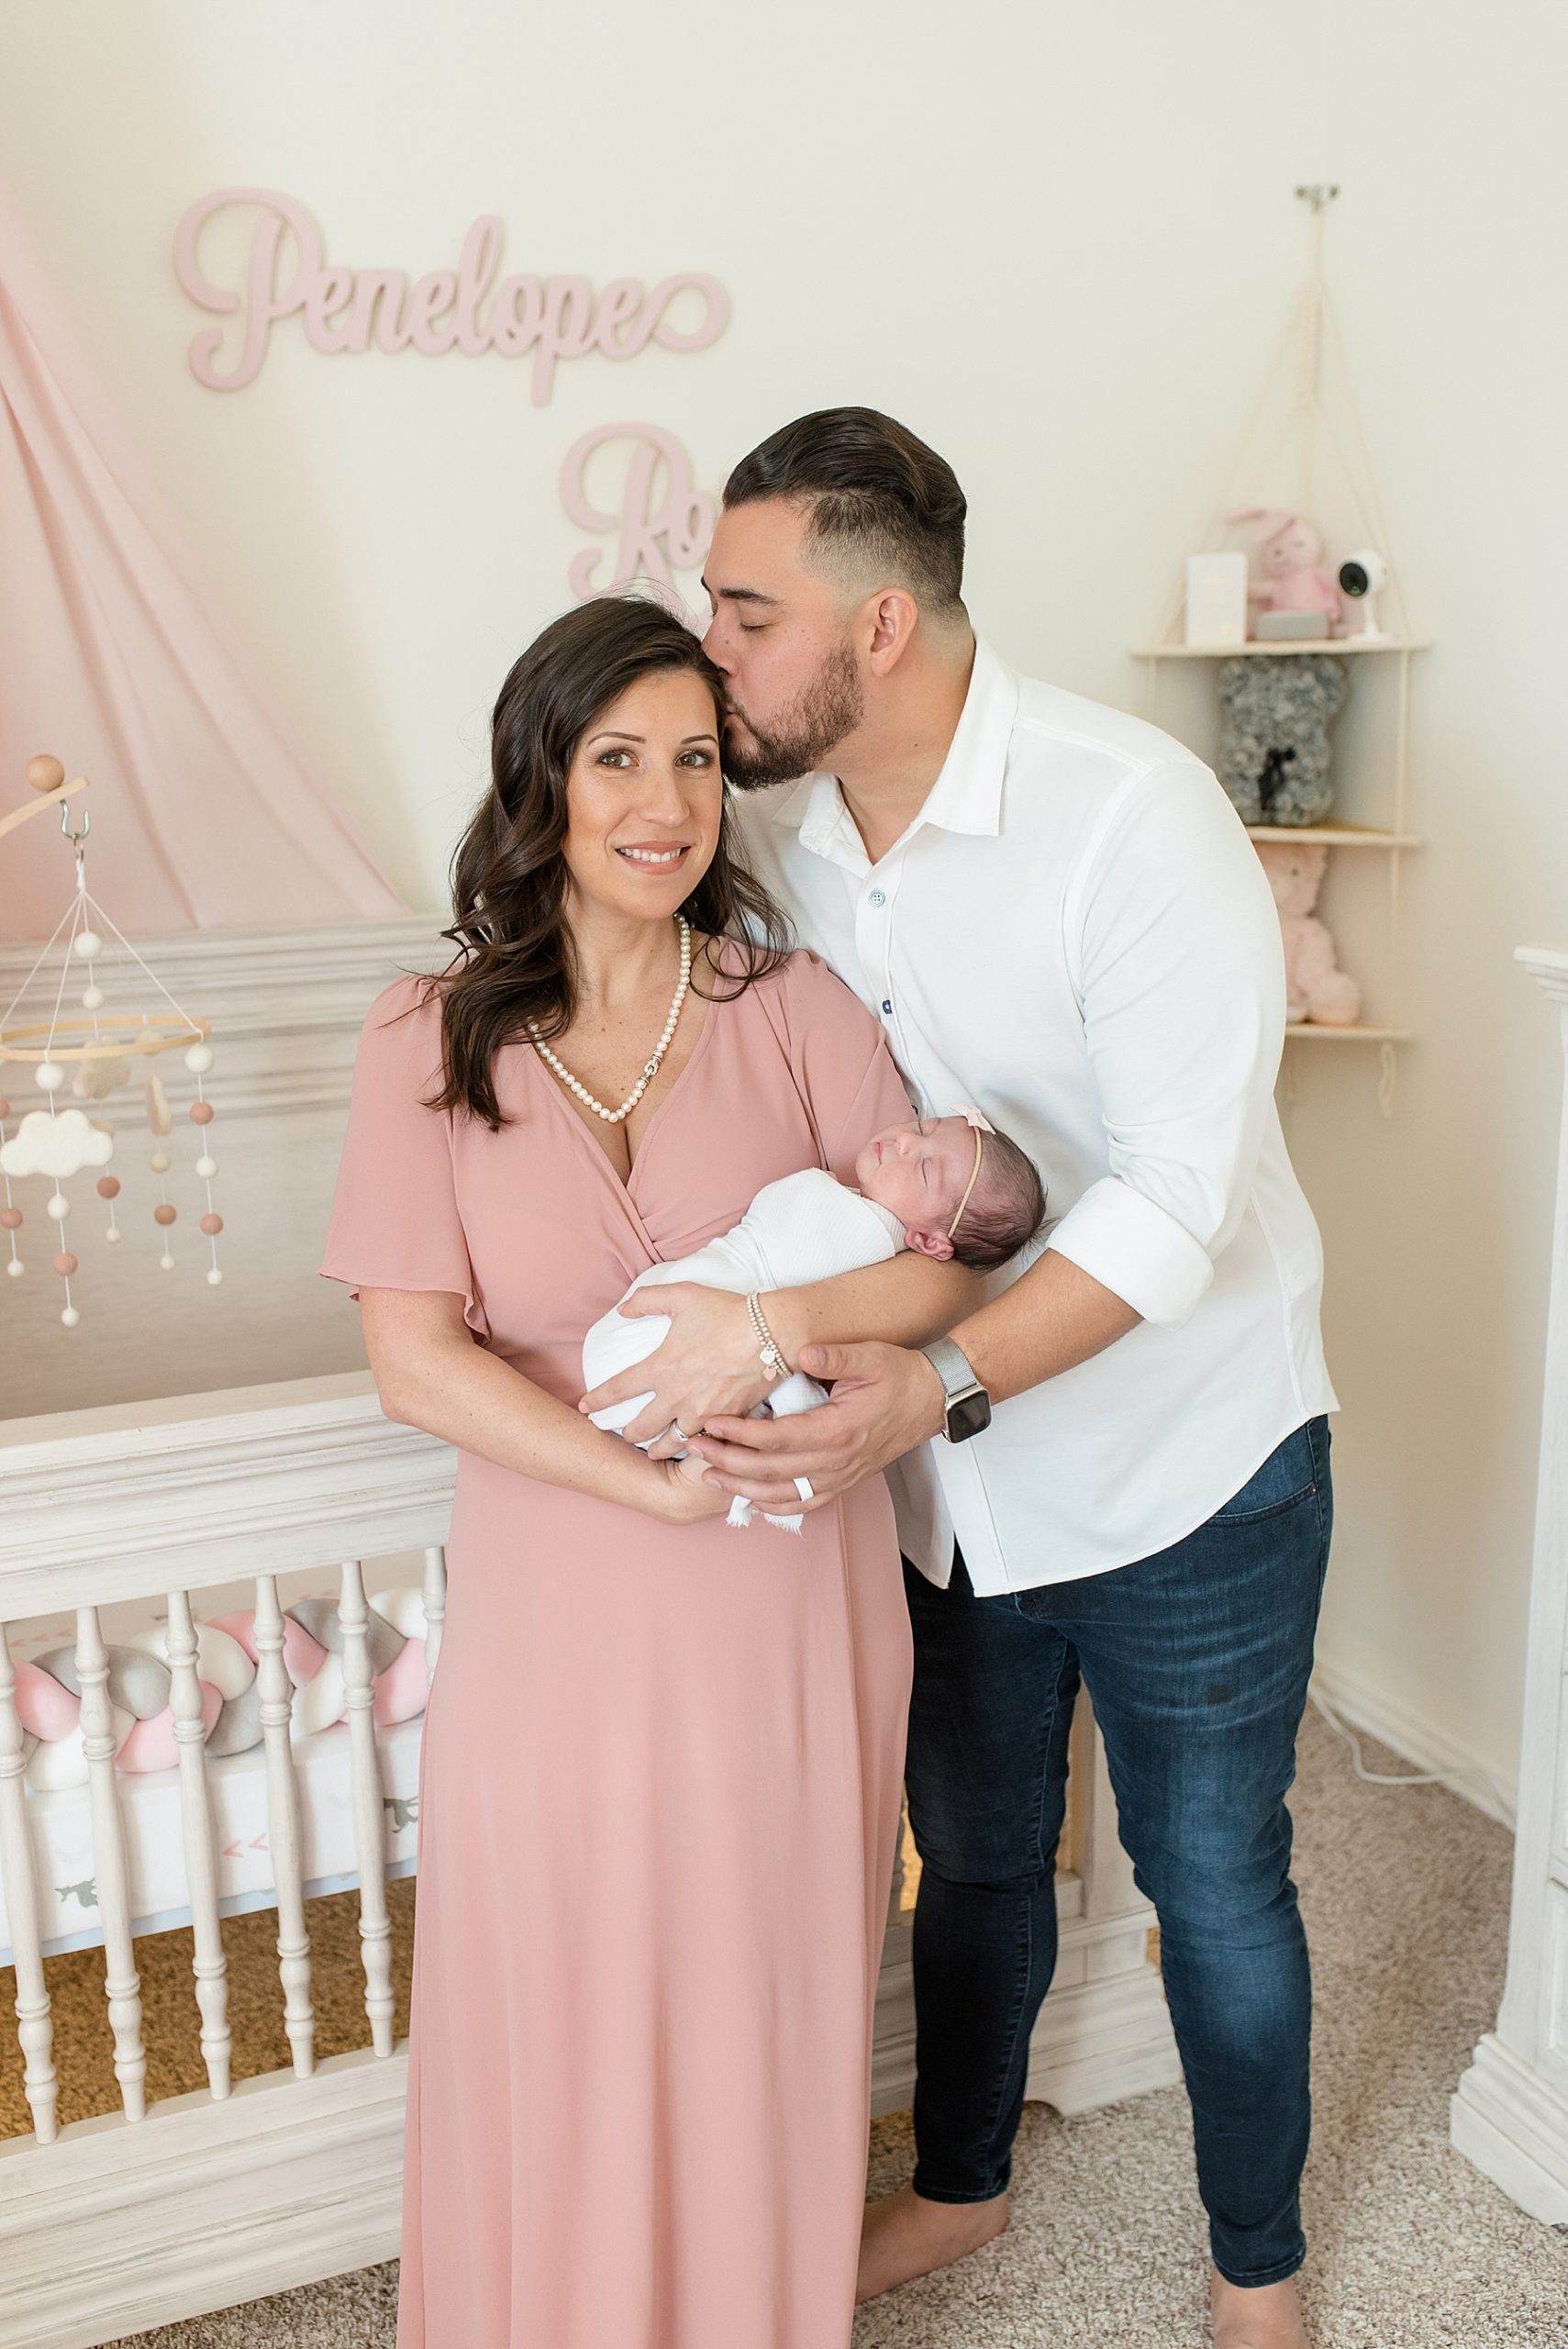 Mom and dad holding newborn baby girl in pink and white nursery | In-Home Newborn Photo Session | Lindsey Dutton Photography | Dallas Area Family Photographer | newborn session, newborn posing ideas, newborn photos, girl nursery inspiration | via lindseyduttonphotography.com